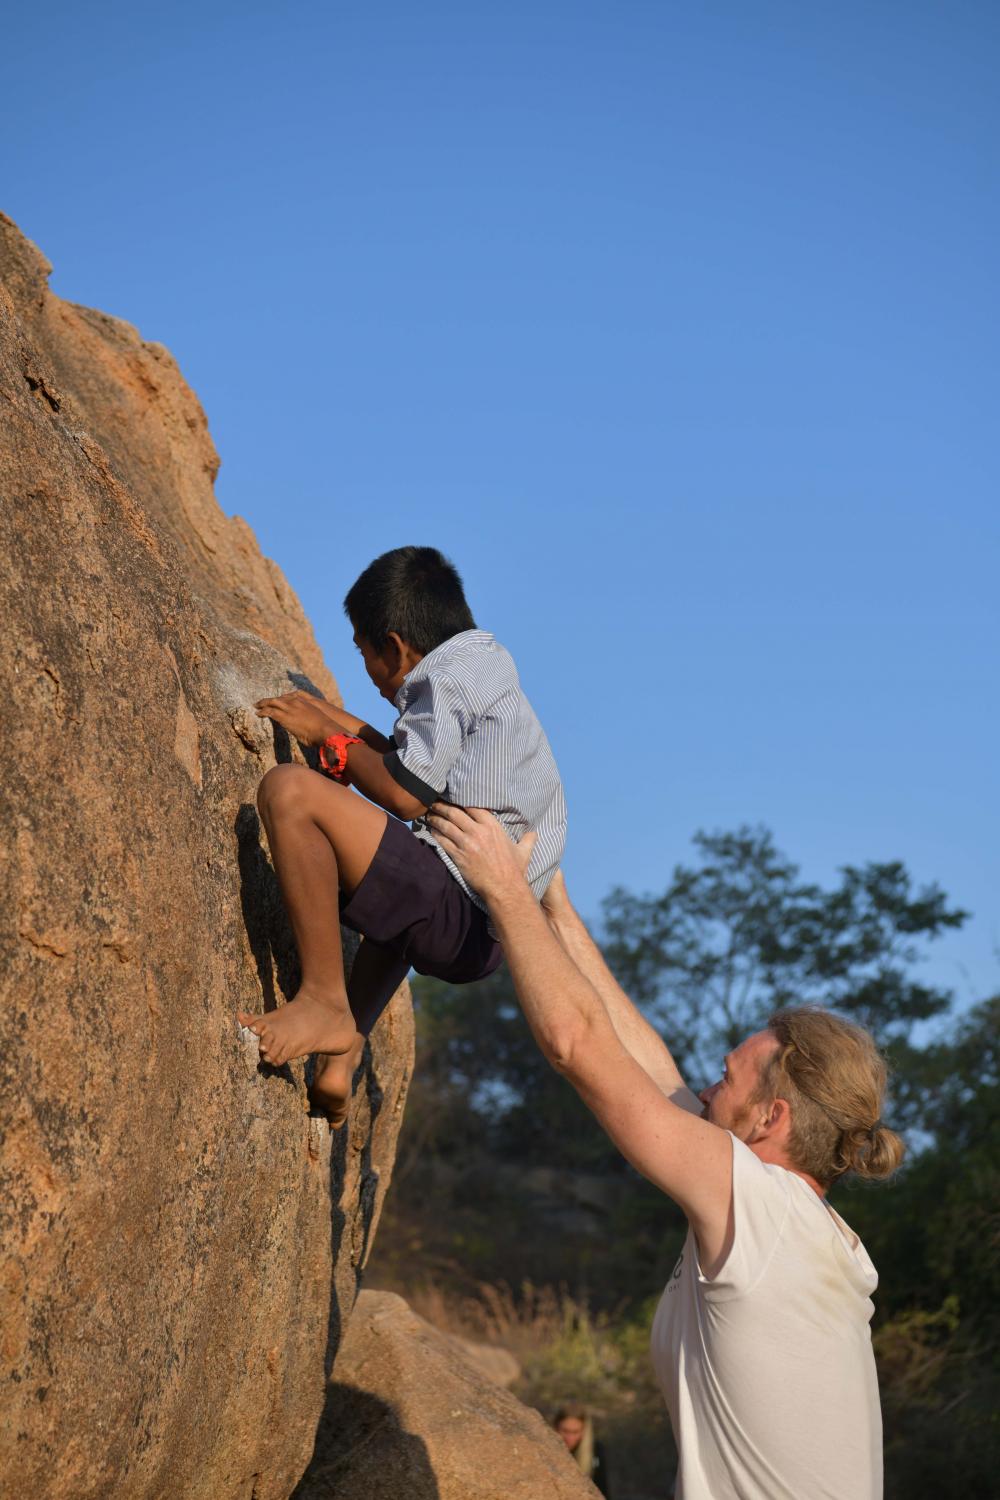 While many like Nick, Yadav and Parashuram would like to expand bouldering in India, the current scenario is far different from their dreams. Russell says, &ldquo;Only the elite can afford as there&rsquo;s a 40% import tax for just a parachute. I wish more could be done, especially for children in and around Hampi. It would be nice to encourage an ordinary Indian who cannot afford a pair of climbing shoes.&rdquo;